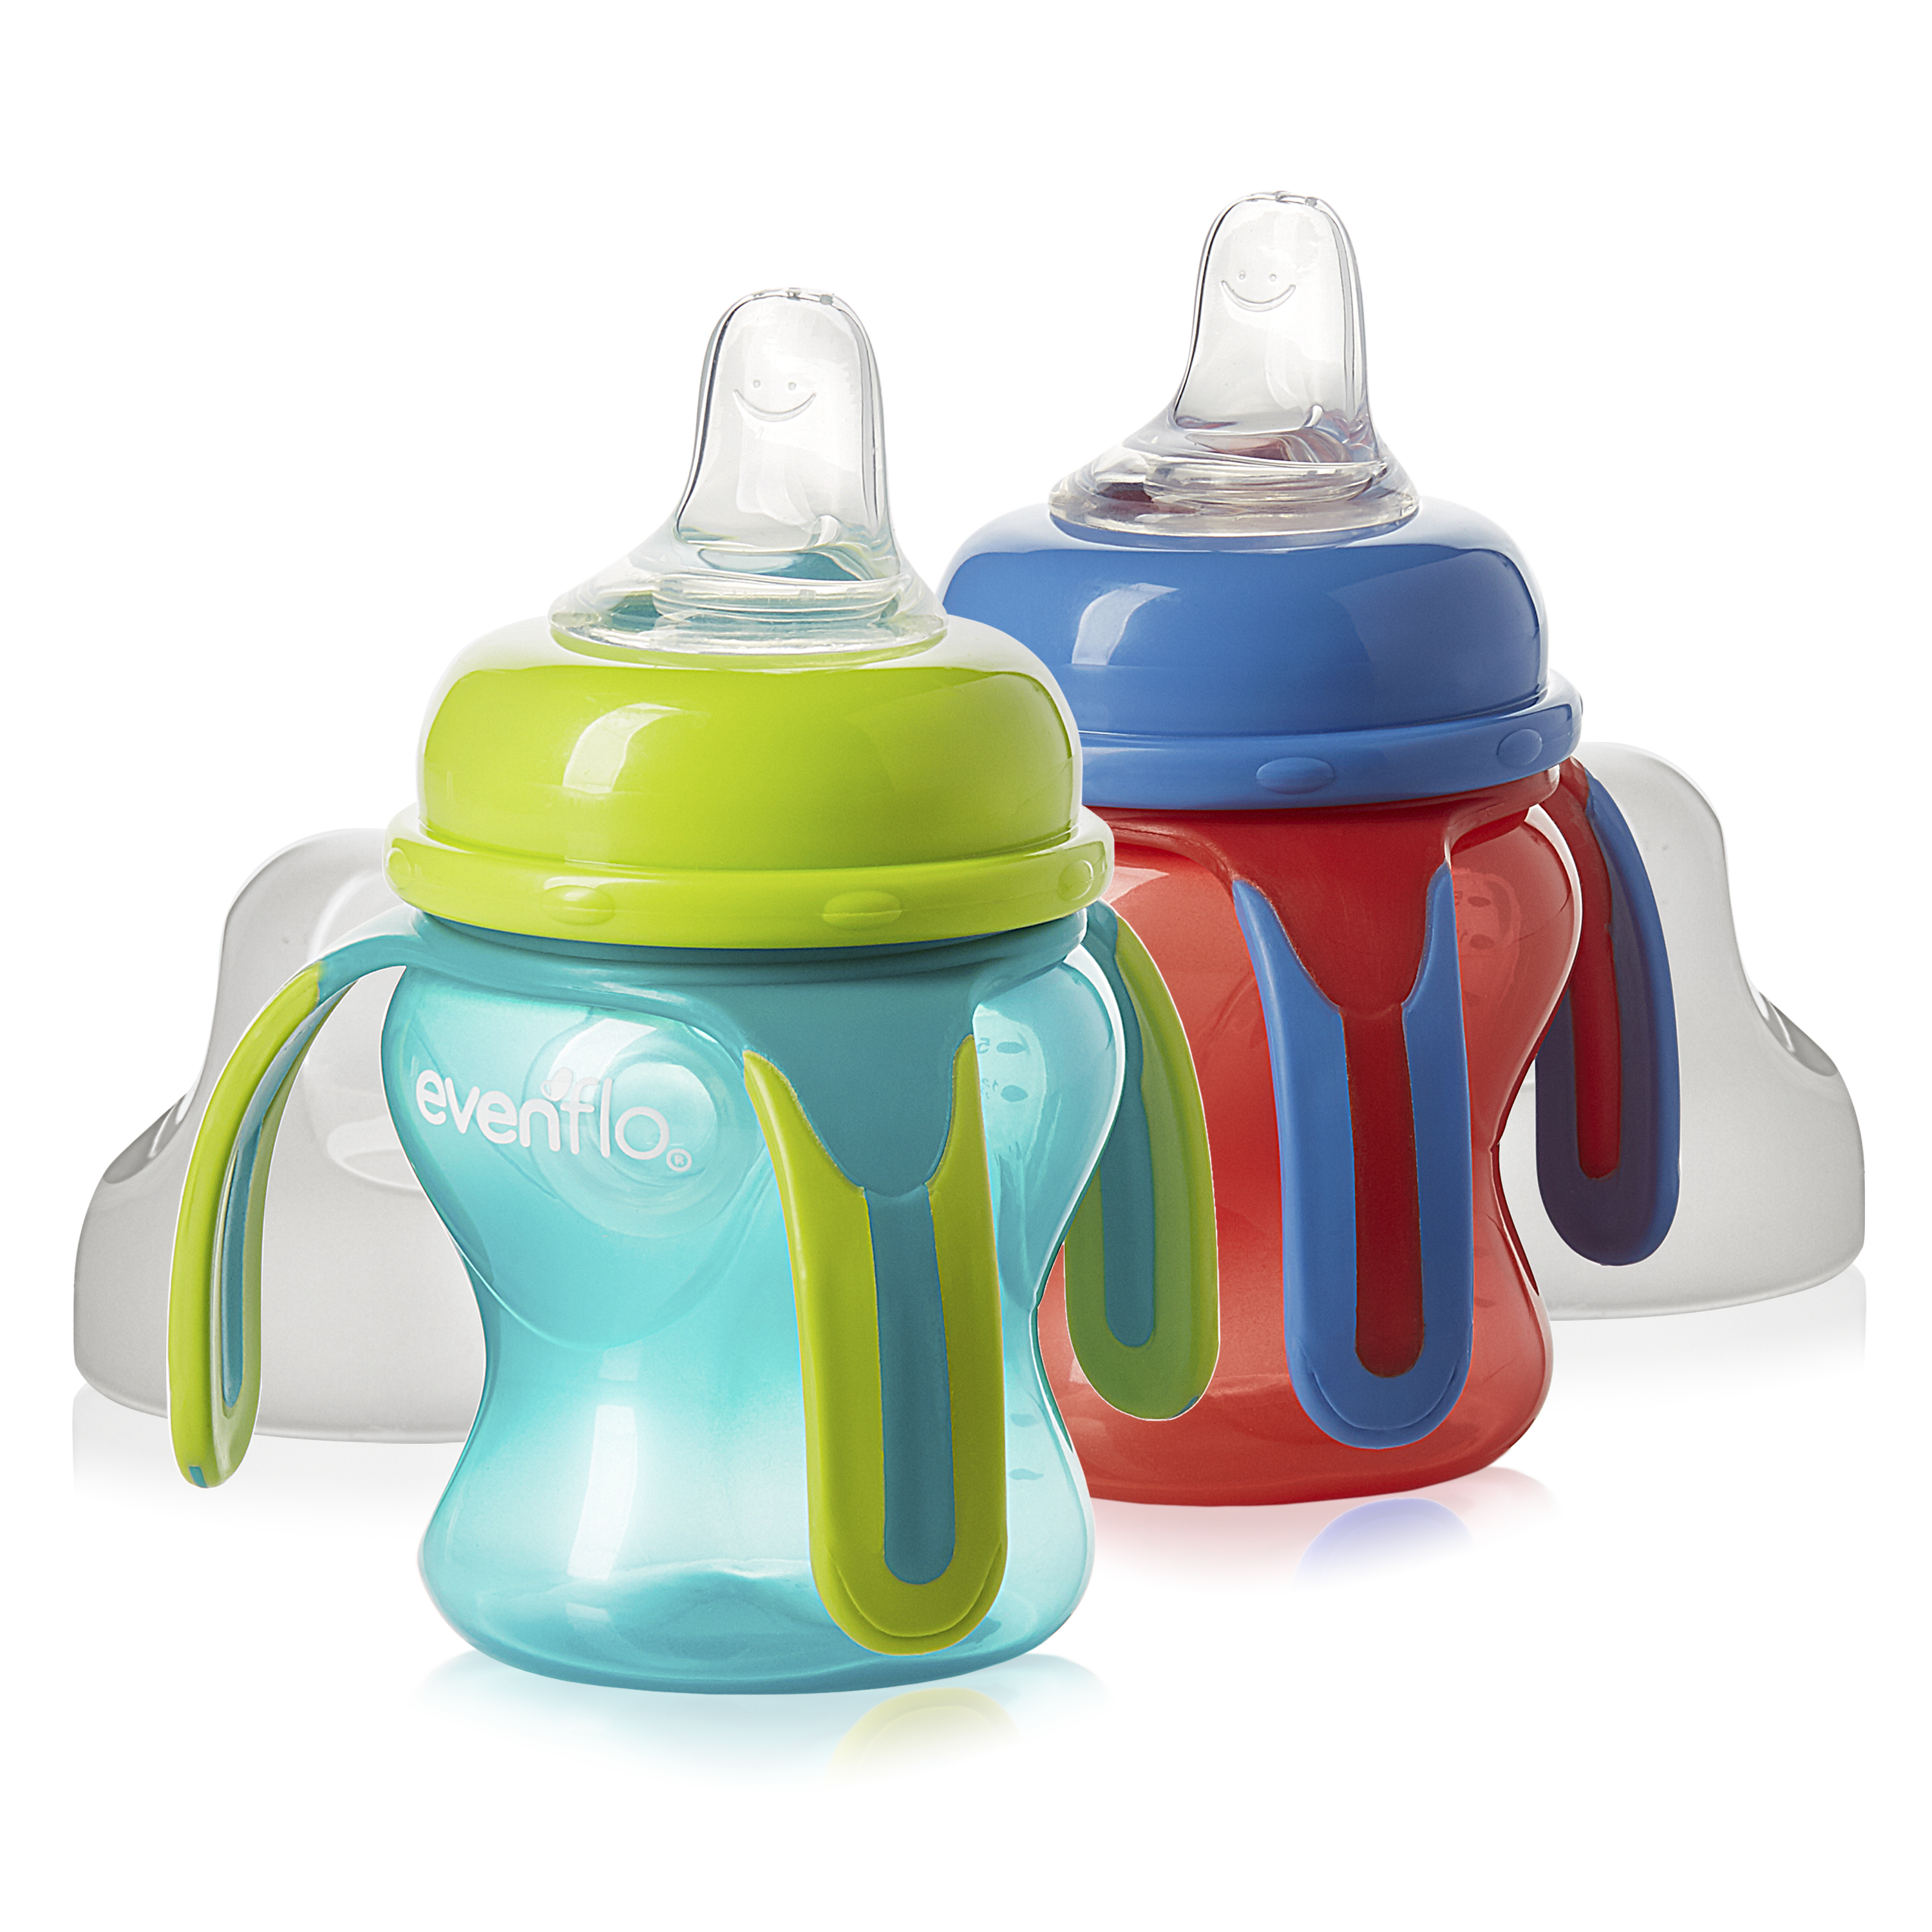 New baby products, Trendy baby gear, Sippy cup